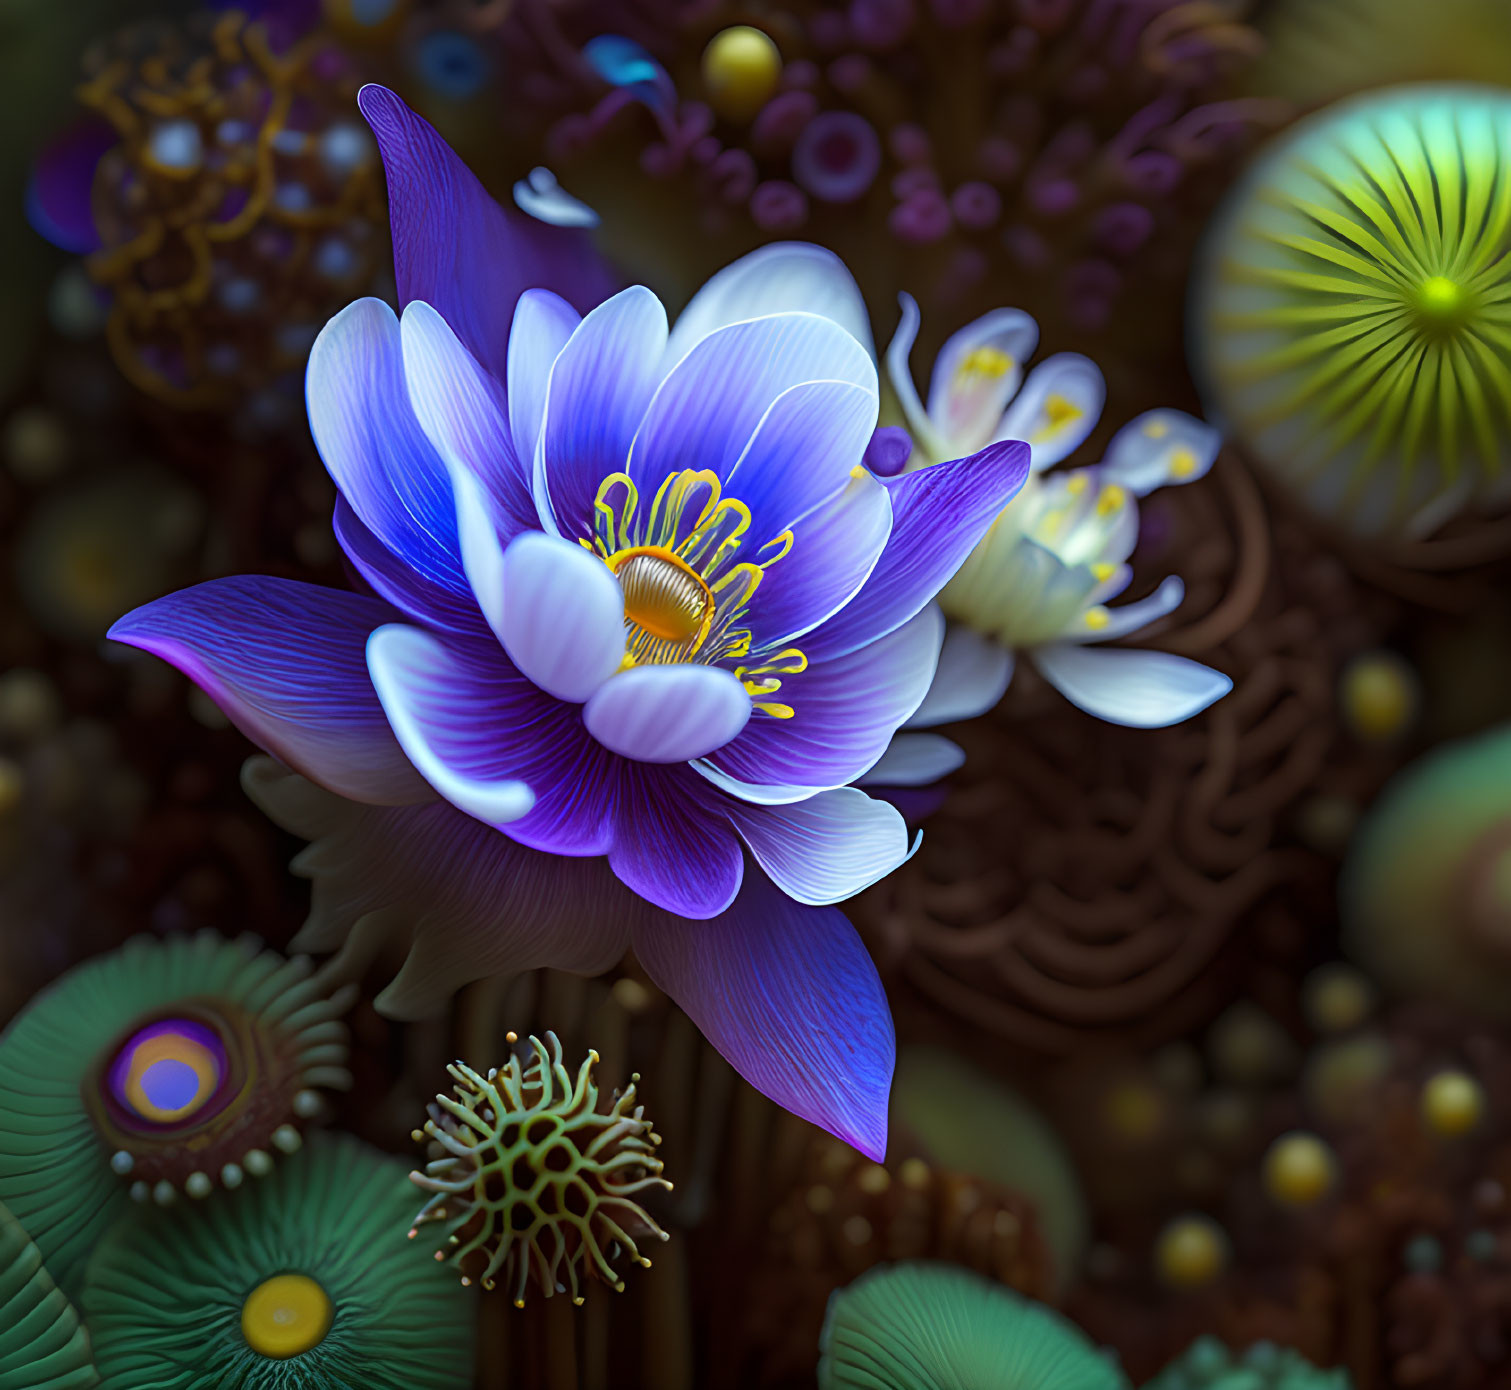 Colorful Digital Illustration of Purple Flower Surrounded by Fantasy Plants